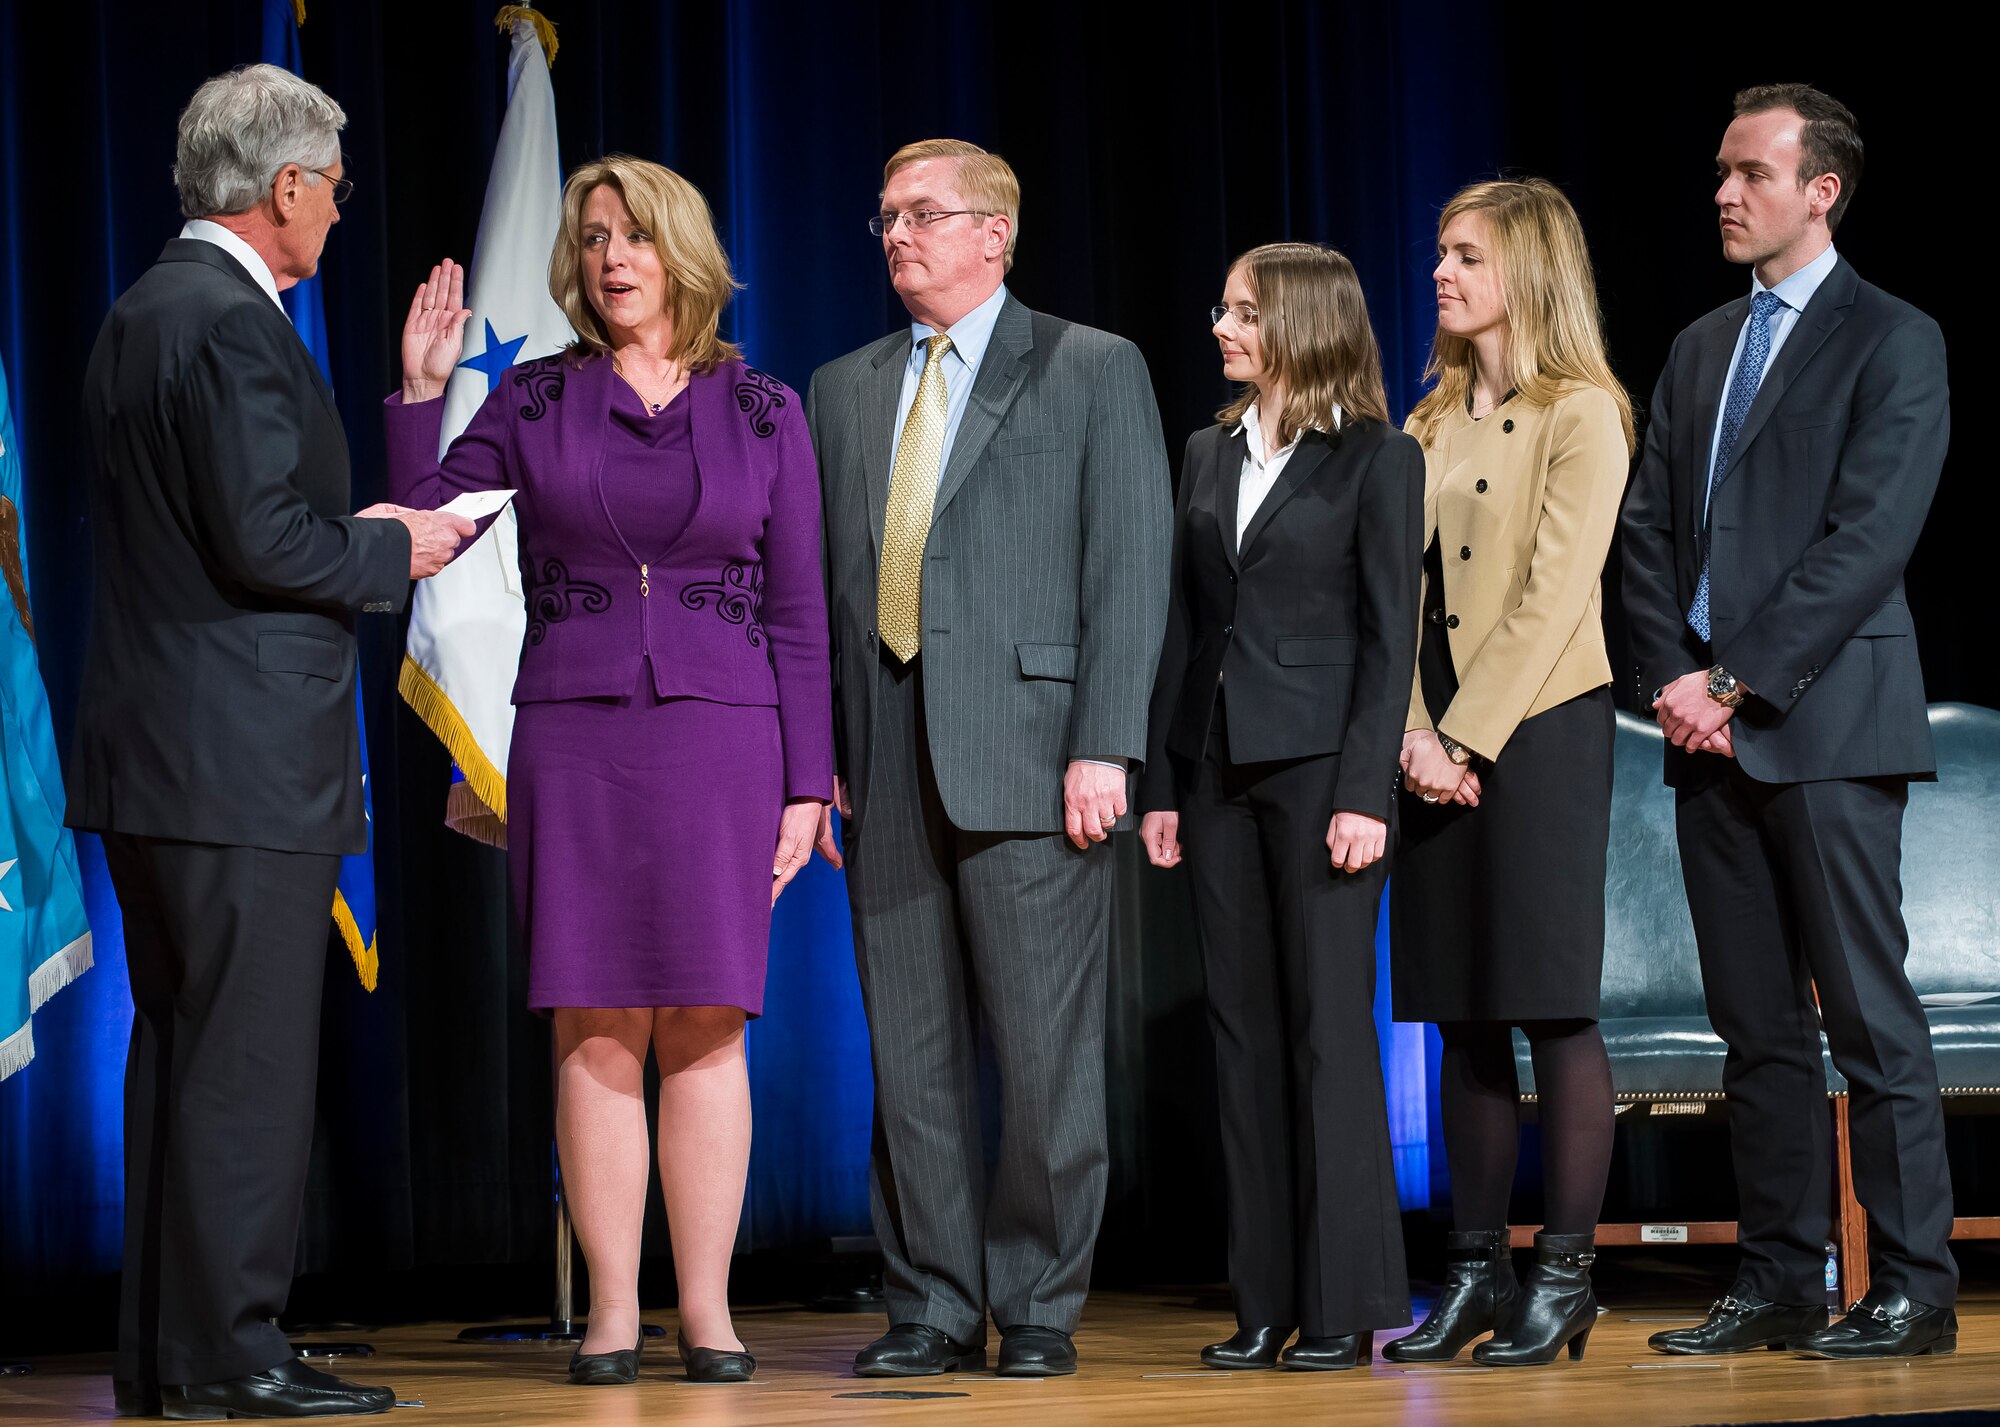 Defense Secretary Chuck Hagel, left, ceremoniously swears in Deborah Lee James, second from left, as the 23rd secretary of the Air Force, as her family looks on during a ceremony in the Pentagon, Washington, D.C., Jan. 24, 2014. James pledged to leave the Air Force some years from now on a path toward greater capability and better affordability. (U.S. Air Force photo/Jim Varhegyi)